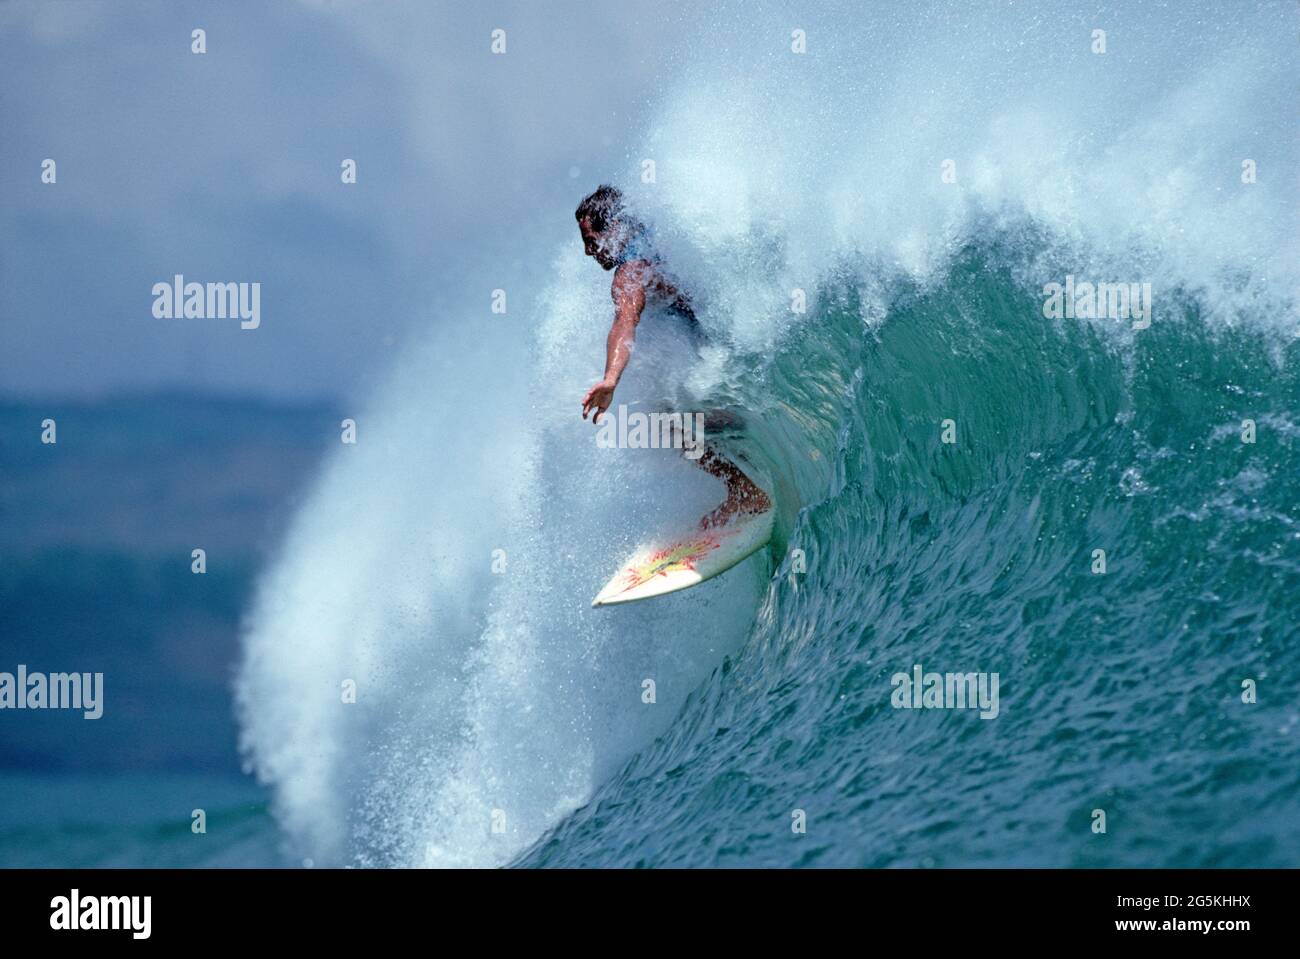 Surfing. Surfer on crest of breaking wave. Stock Photo